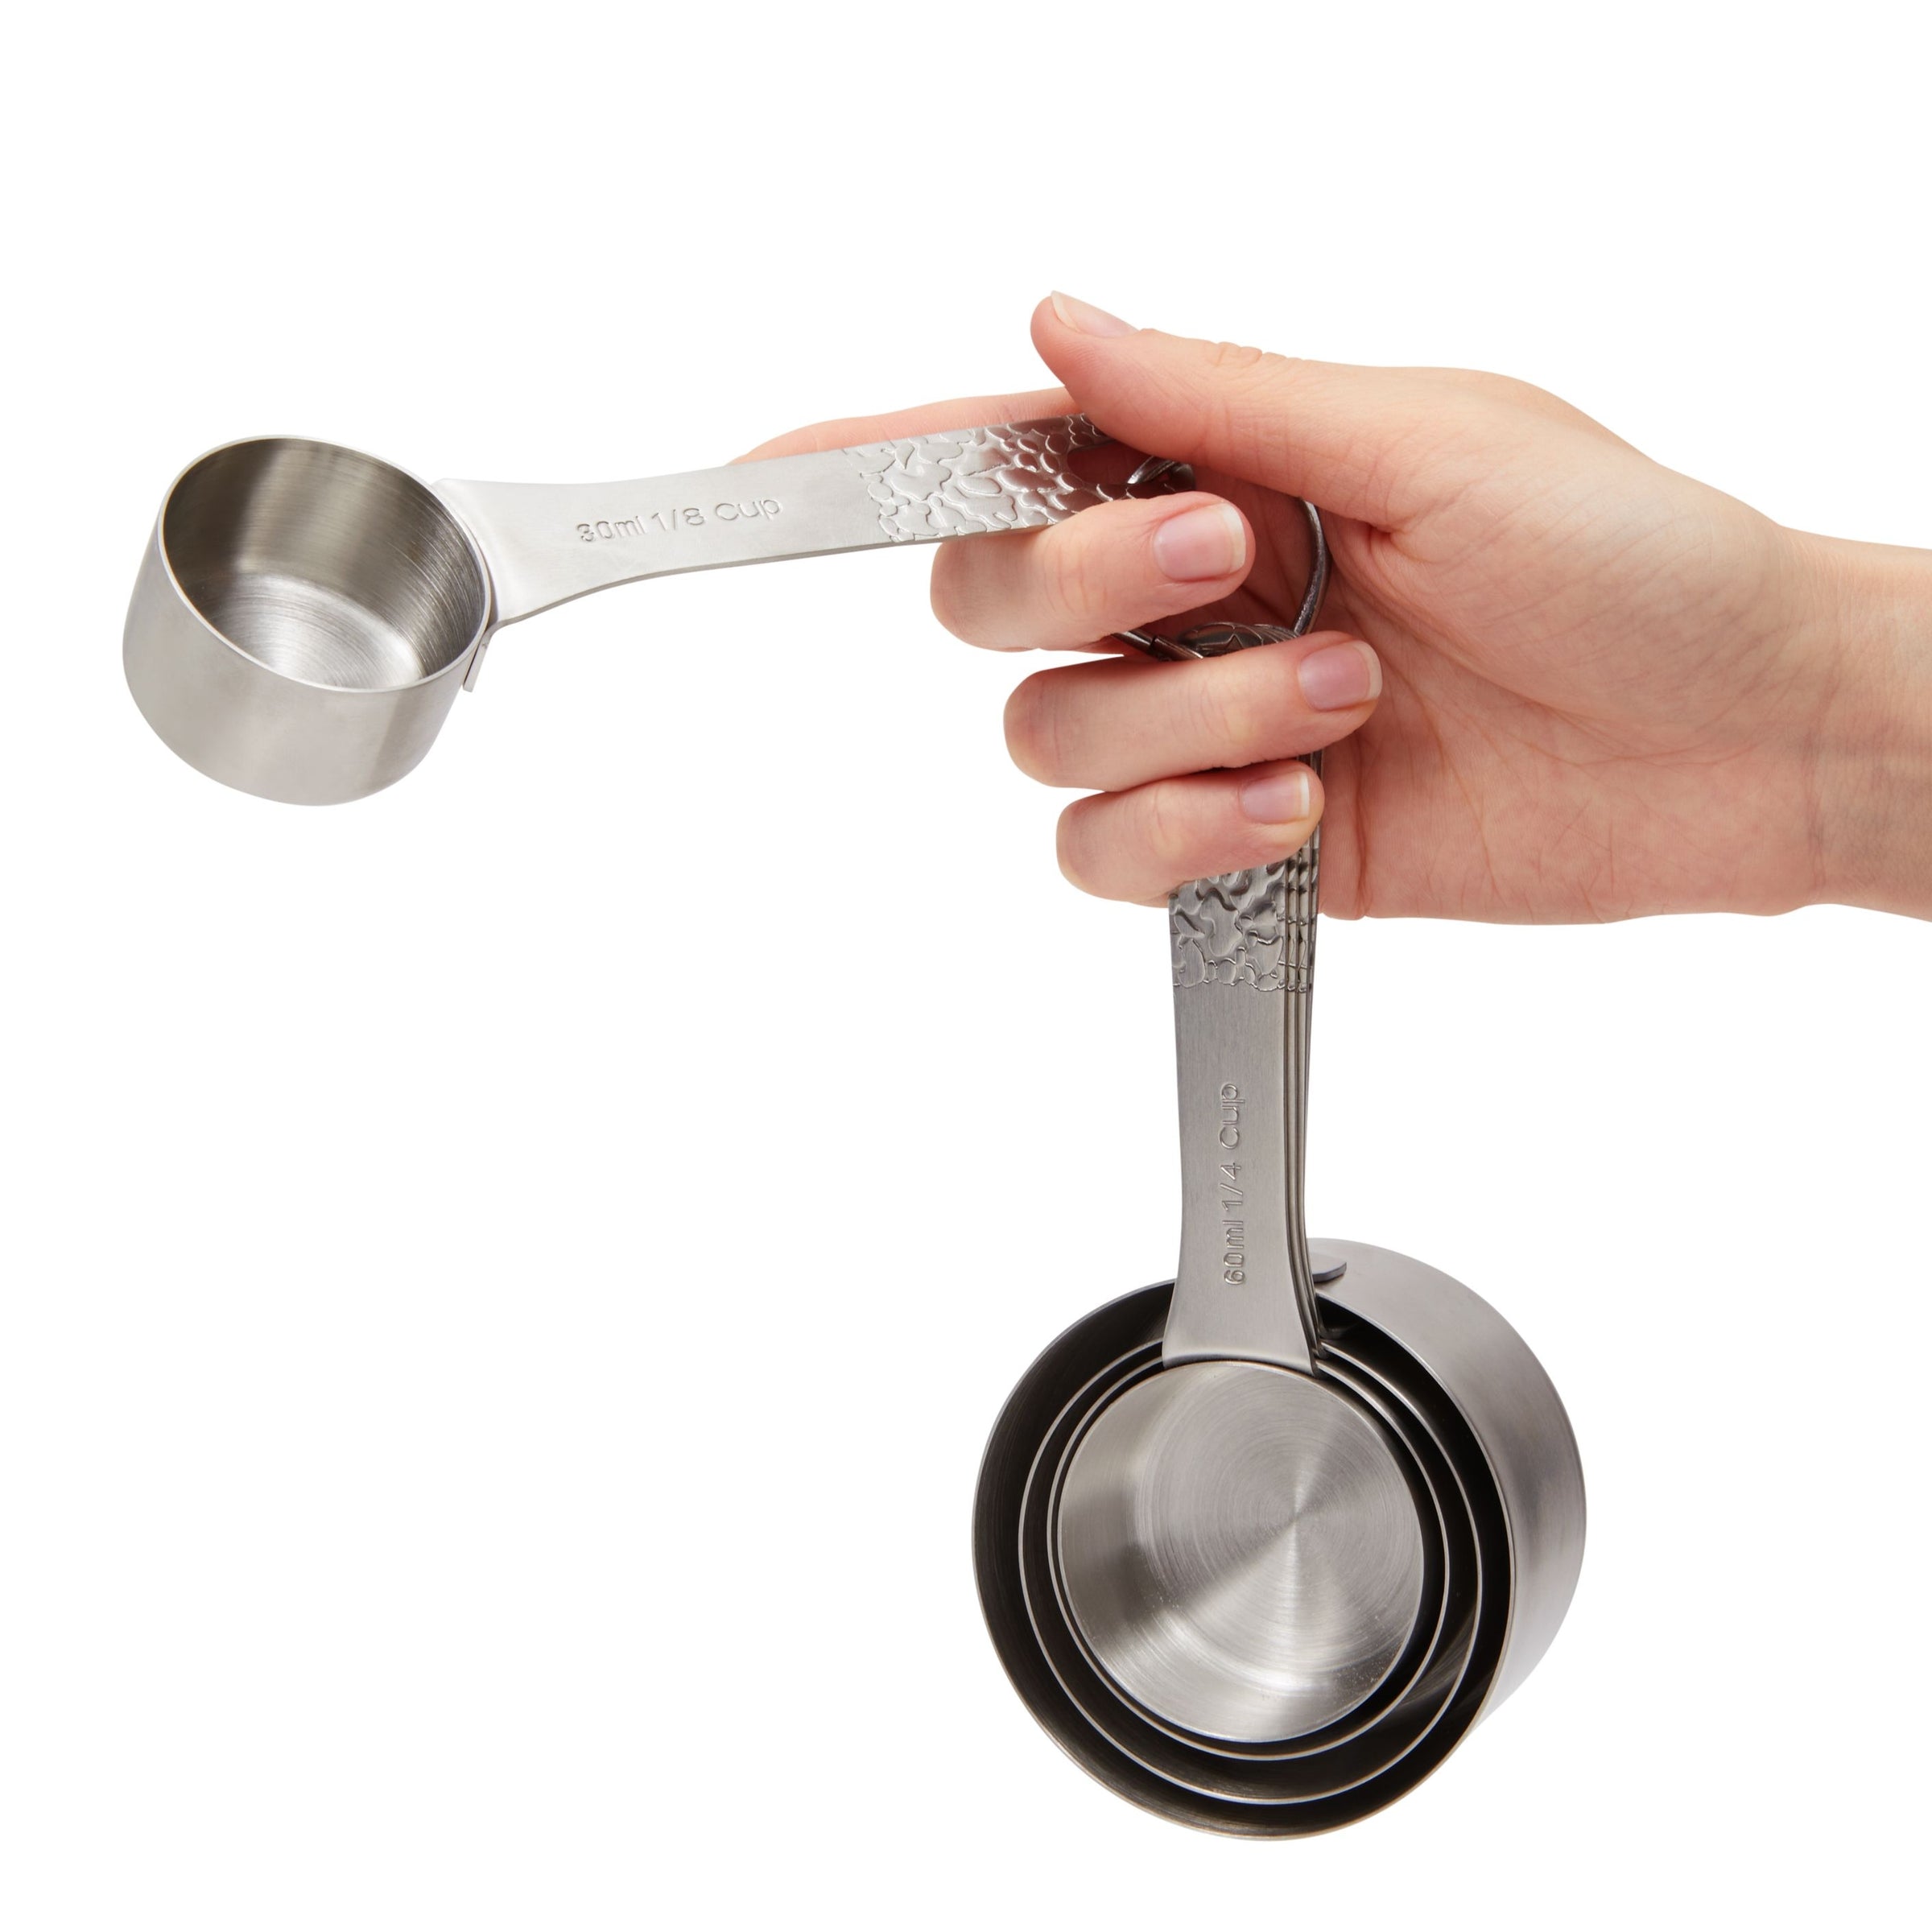 Stainless Steel Measuring Cup and Spoon Set, US and Metric